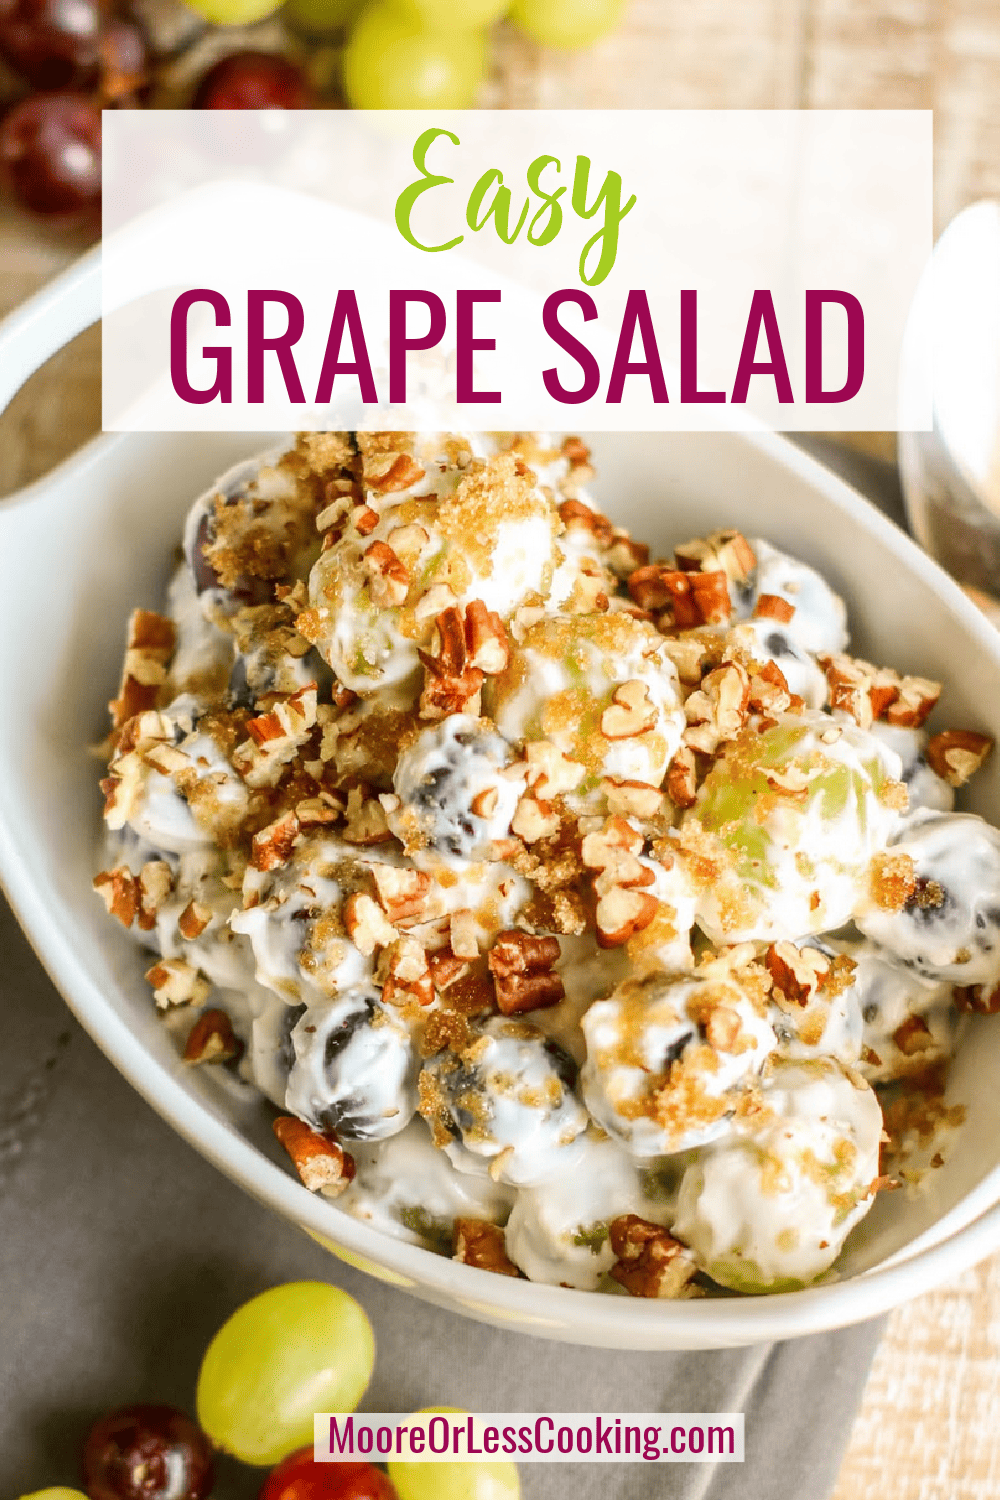 Plump, juicy green and red grapes are tossed in a sweet and creamy dressing and garnished with a brown sugar and pecan topping in this easy grape salad recipe. It's the perfect dish for potlucks and BBQs that comes together in just minutes! via @Mooreorlesscook